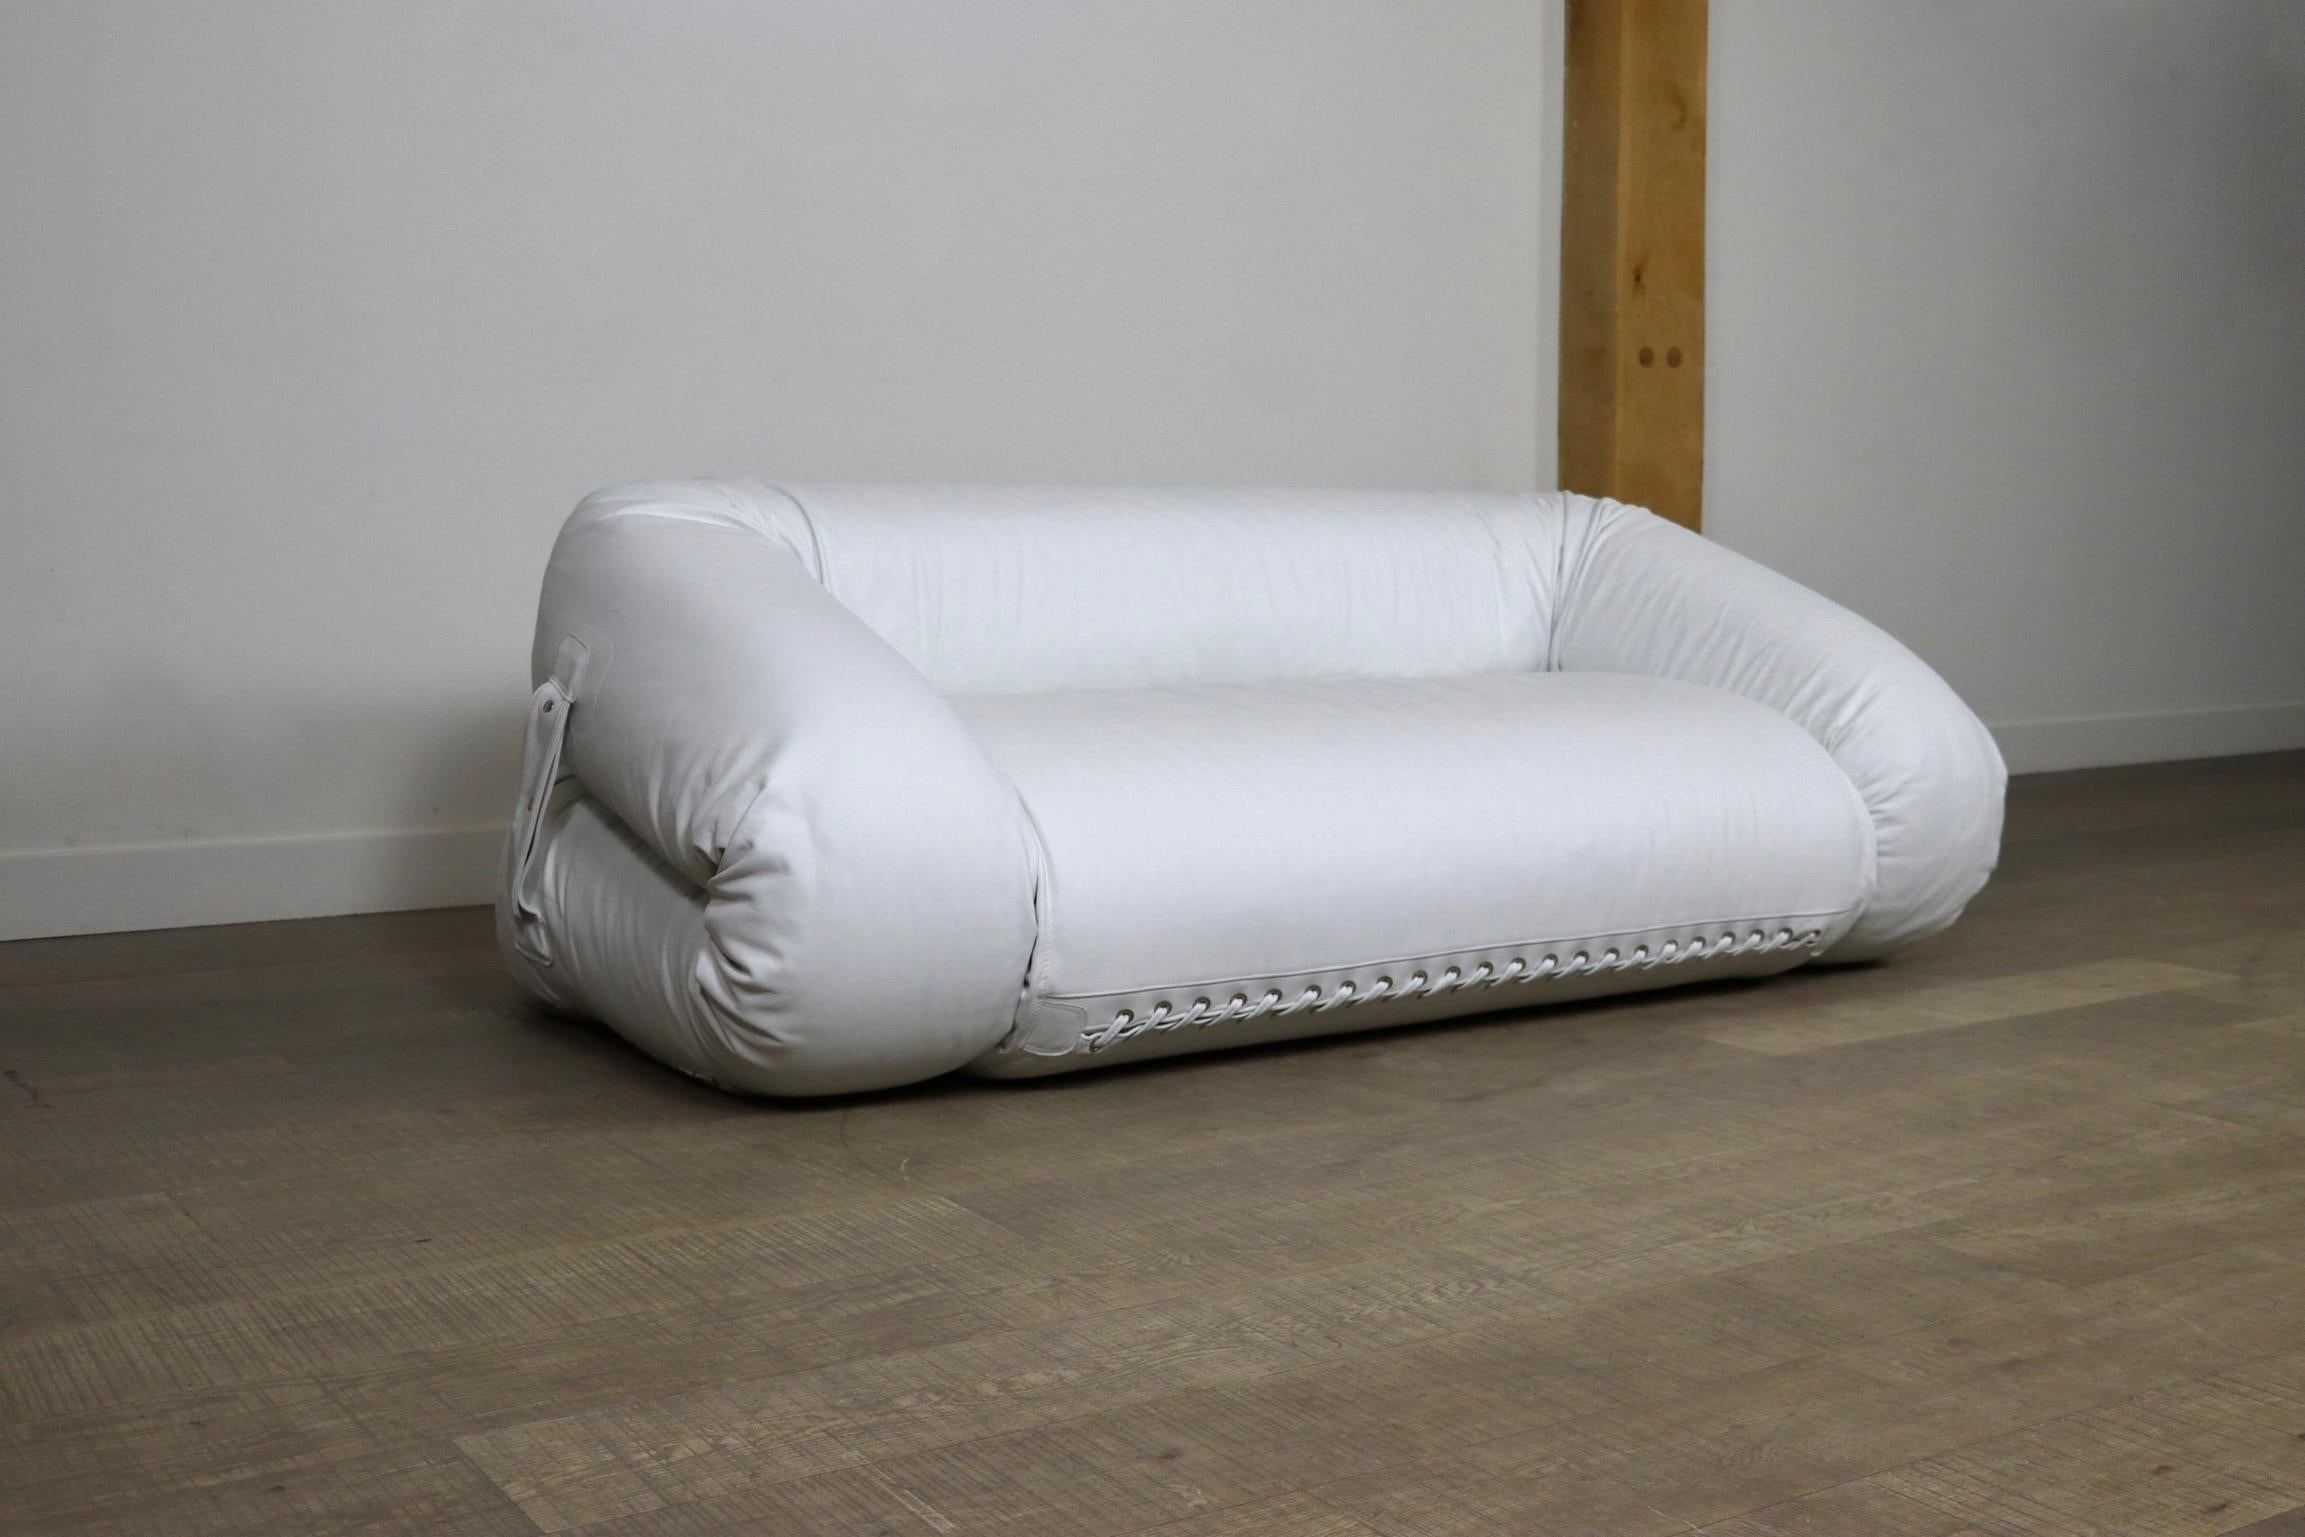 Incredible two seater Anfibio sofa bed in white leather by Alessandro Becchi for Giovanetti Collezione Italy 1971. This stunning white leather upholstery in combination with the white teddy fabric on the mattress inside fits perfectly with the